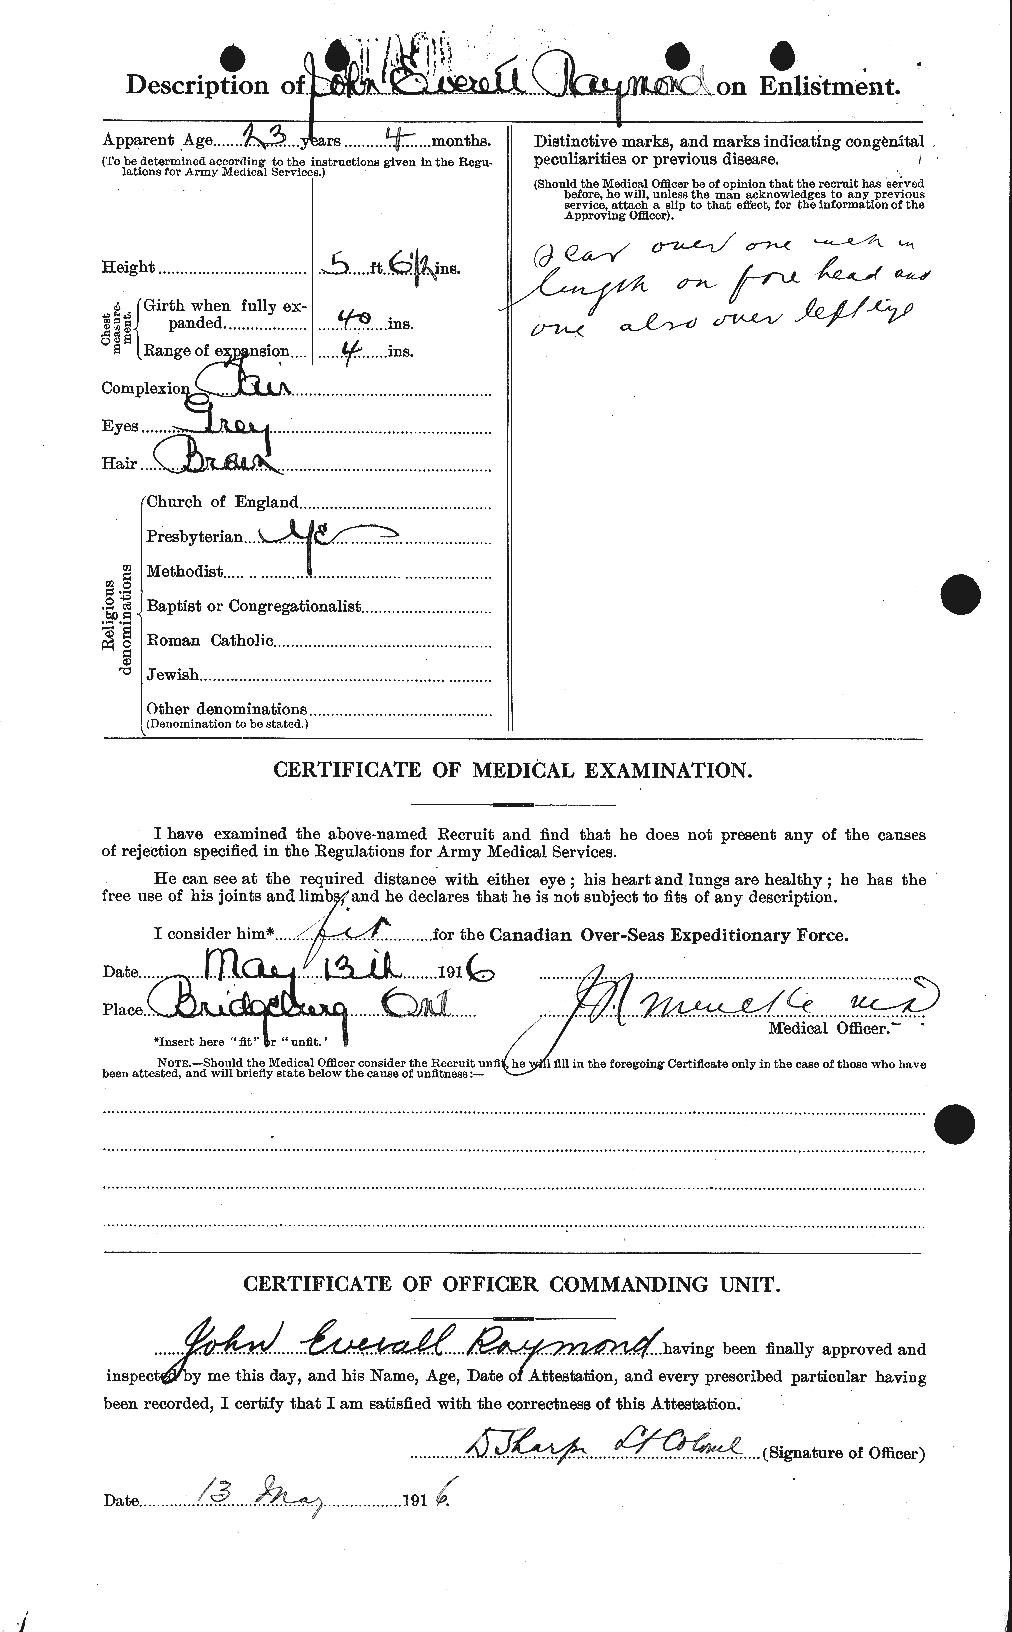 Personnel Records of the First World War - CEF 595379b